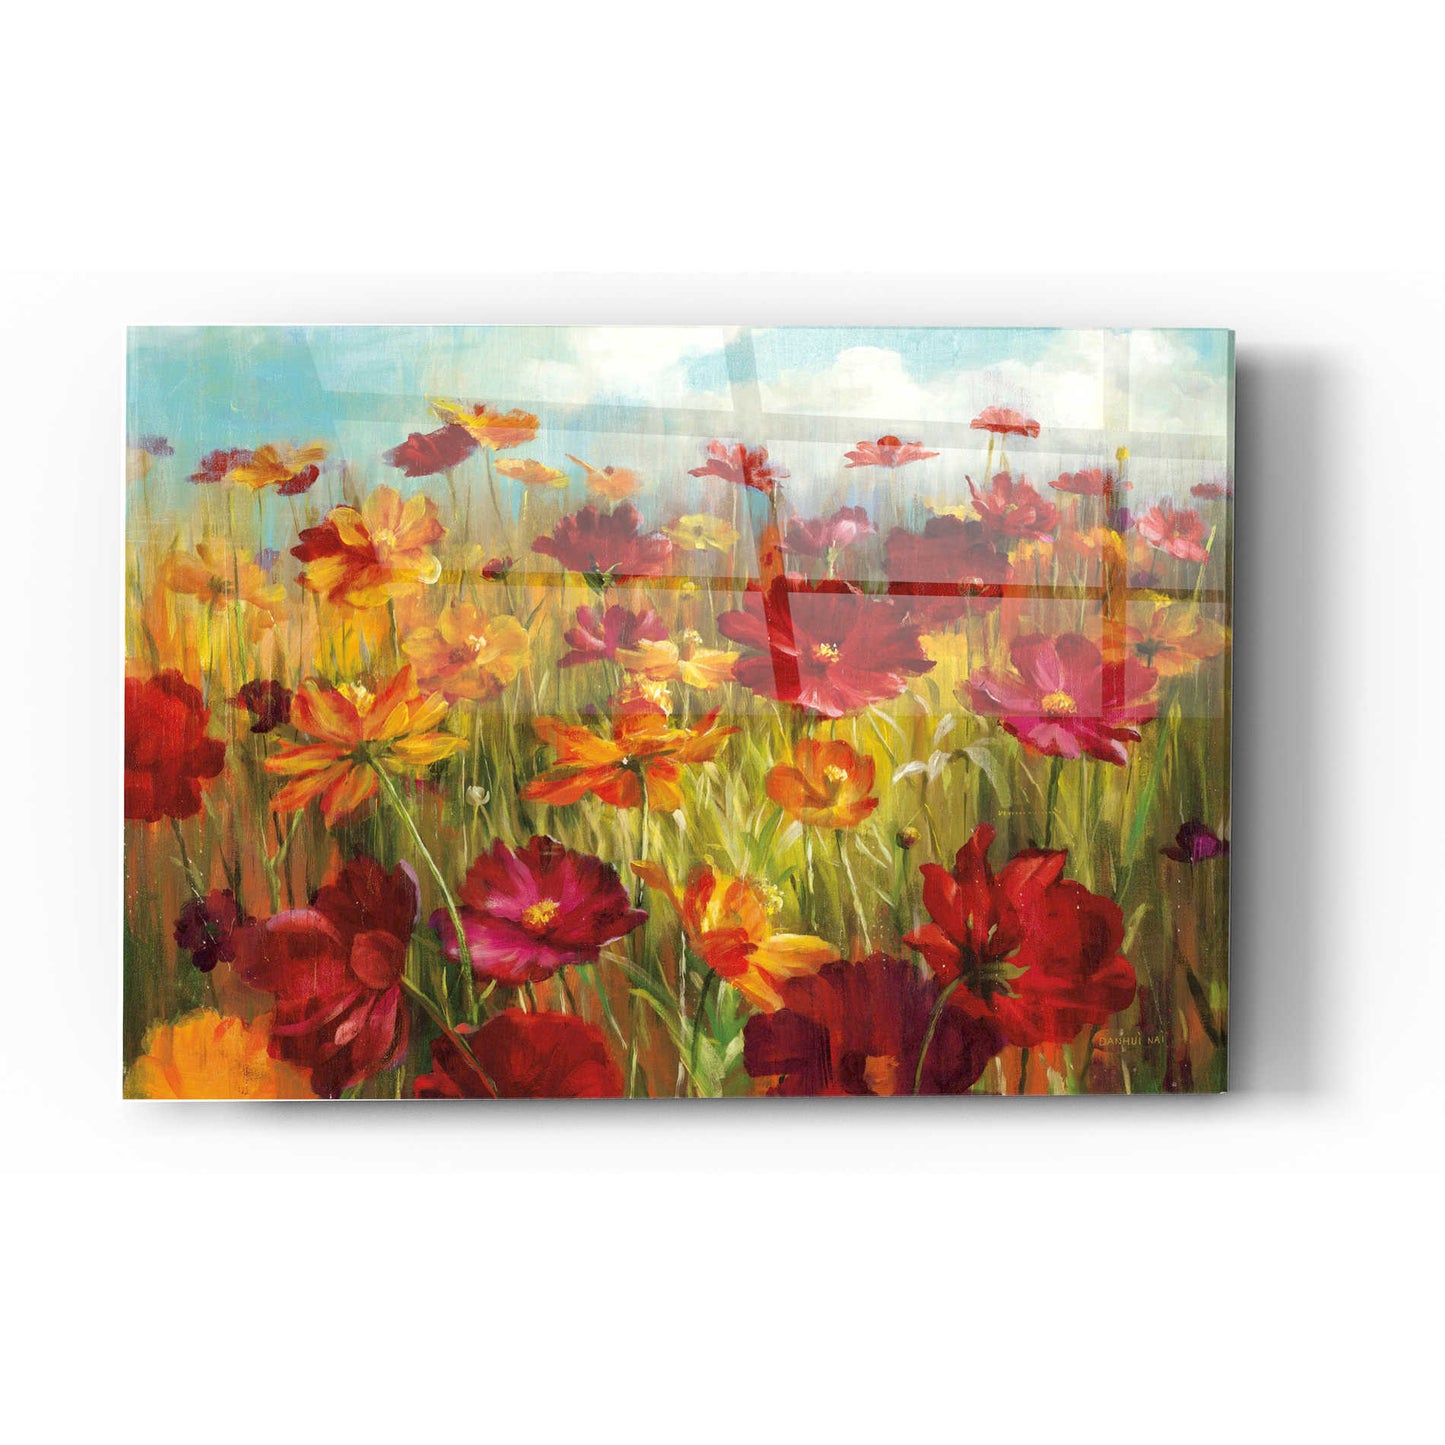 Epic Art 'Cosmos in the Field' by Danhui Nai, Acrylic Glass Wall Art,16x24